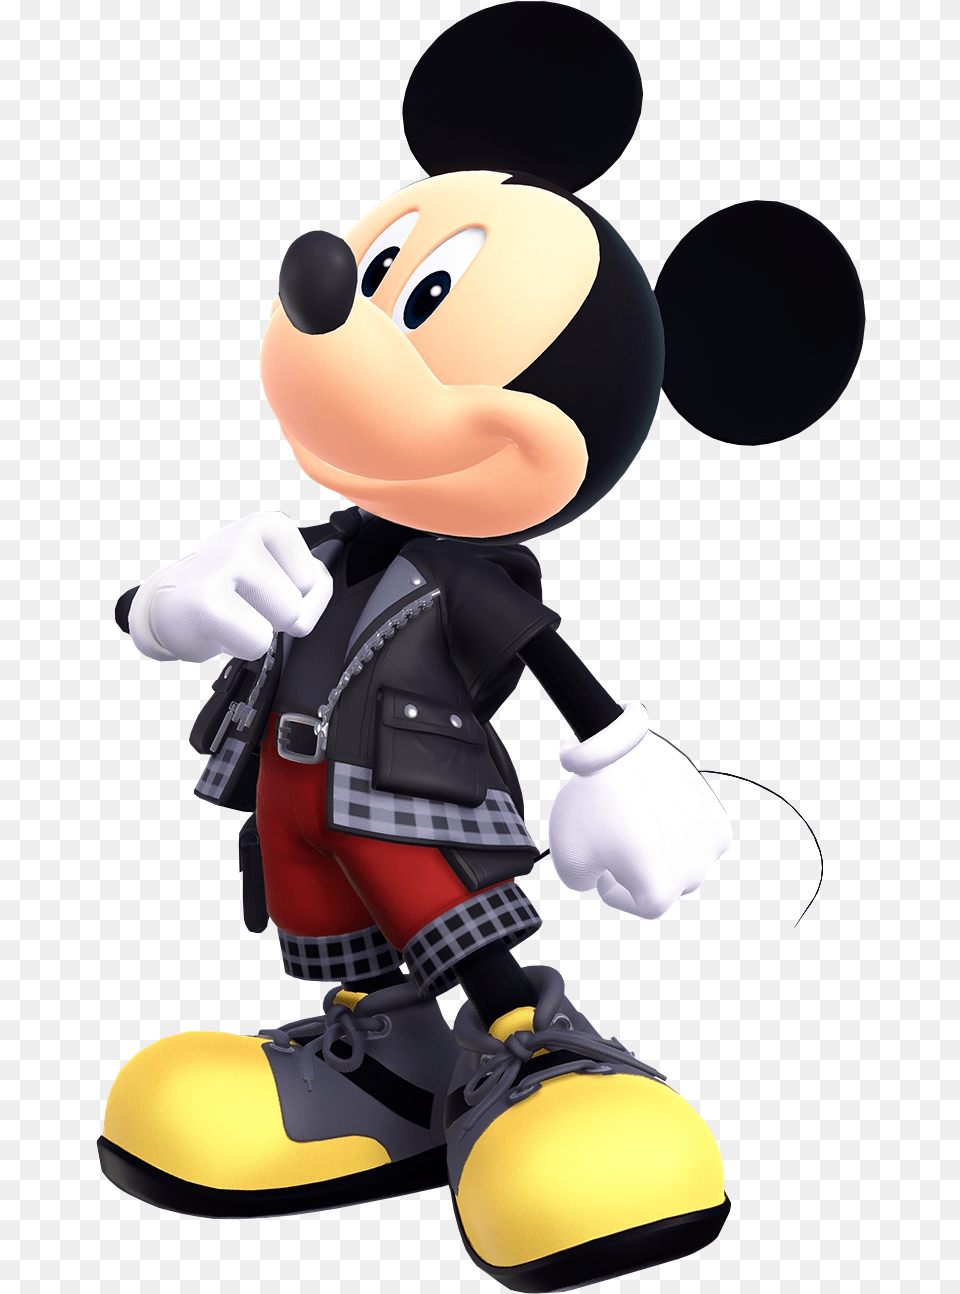 Mickey Mouse 01 Khiii Kingdom Hearts 3 King Mickey, Clothing, Glove, Toy, Ping Pong Free Transparent Png